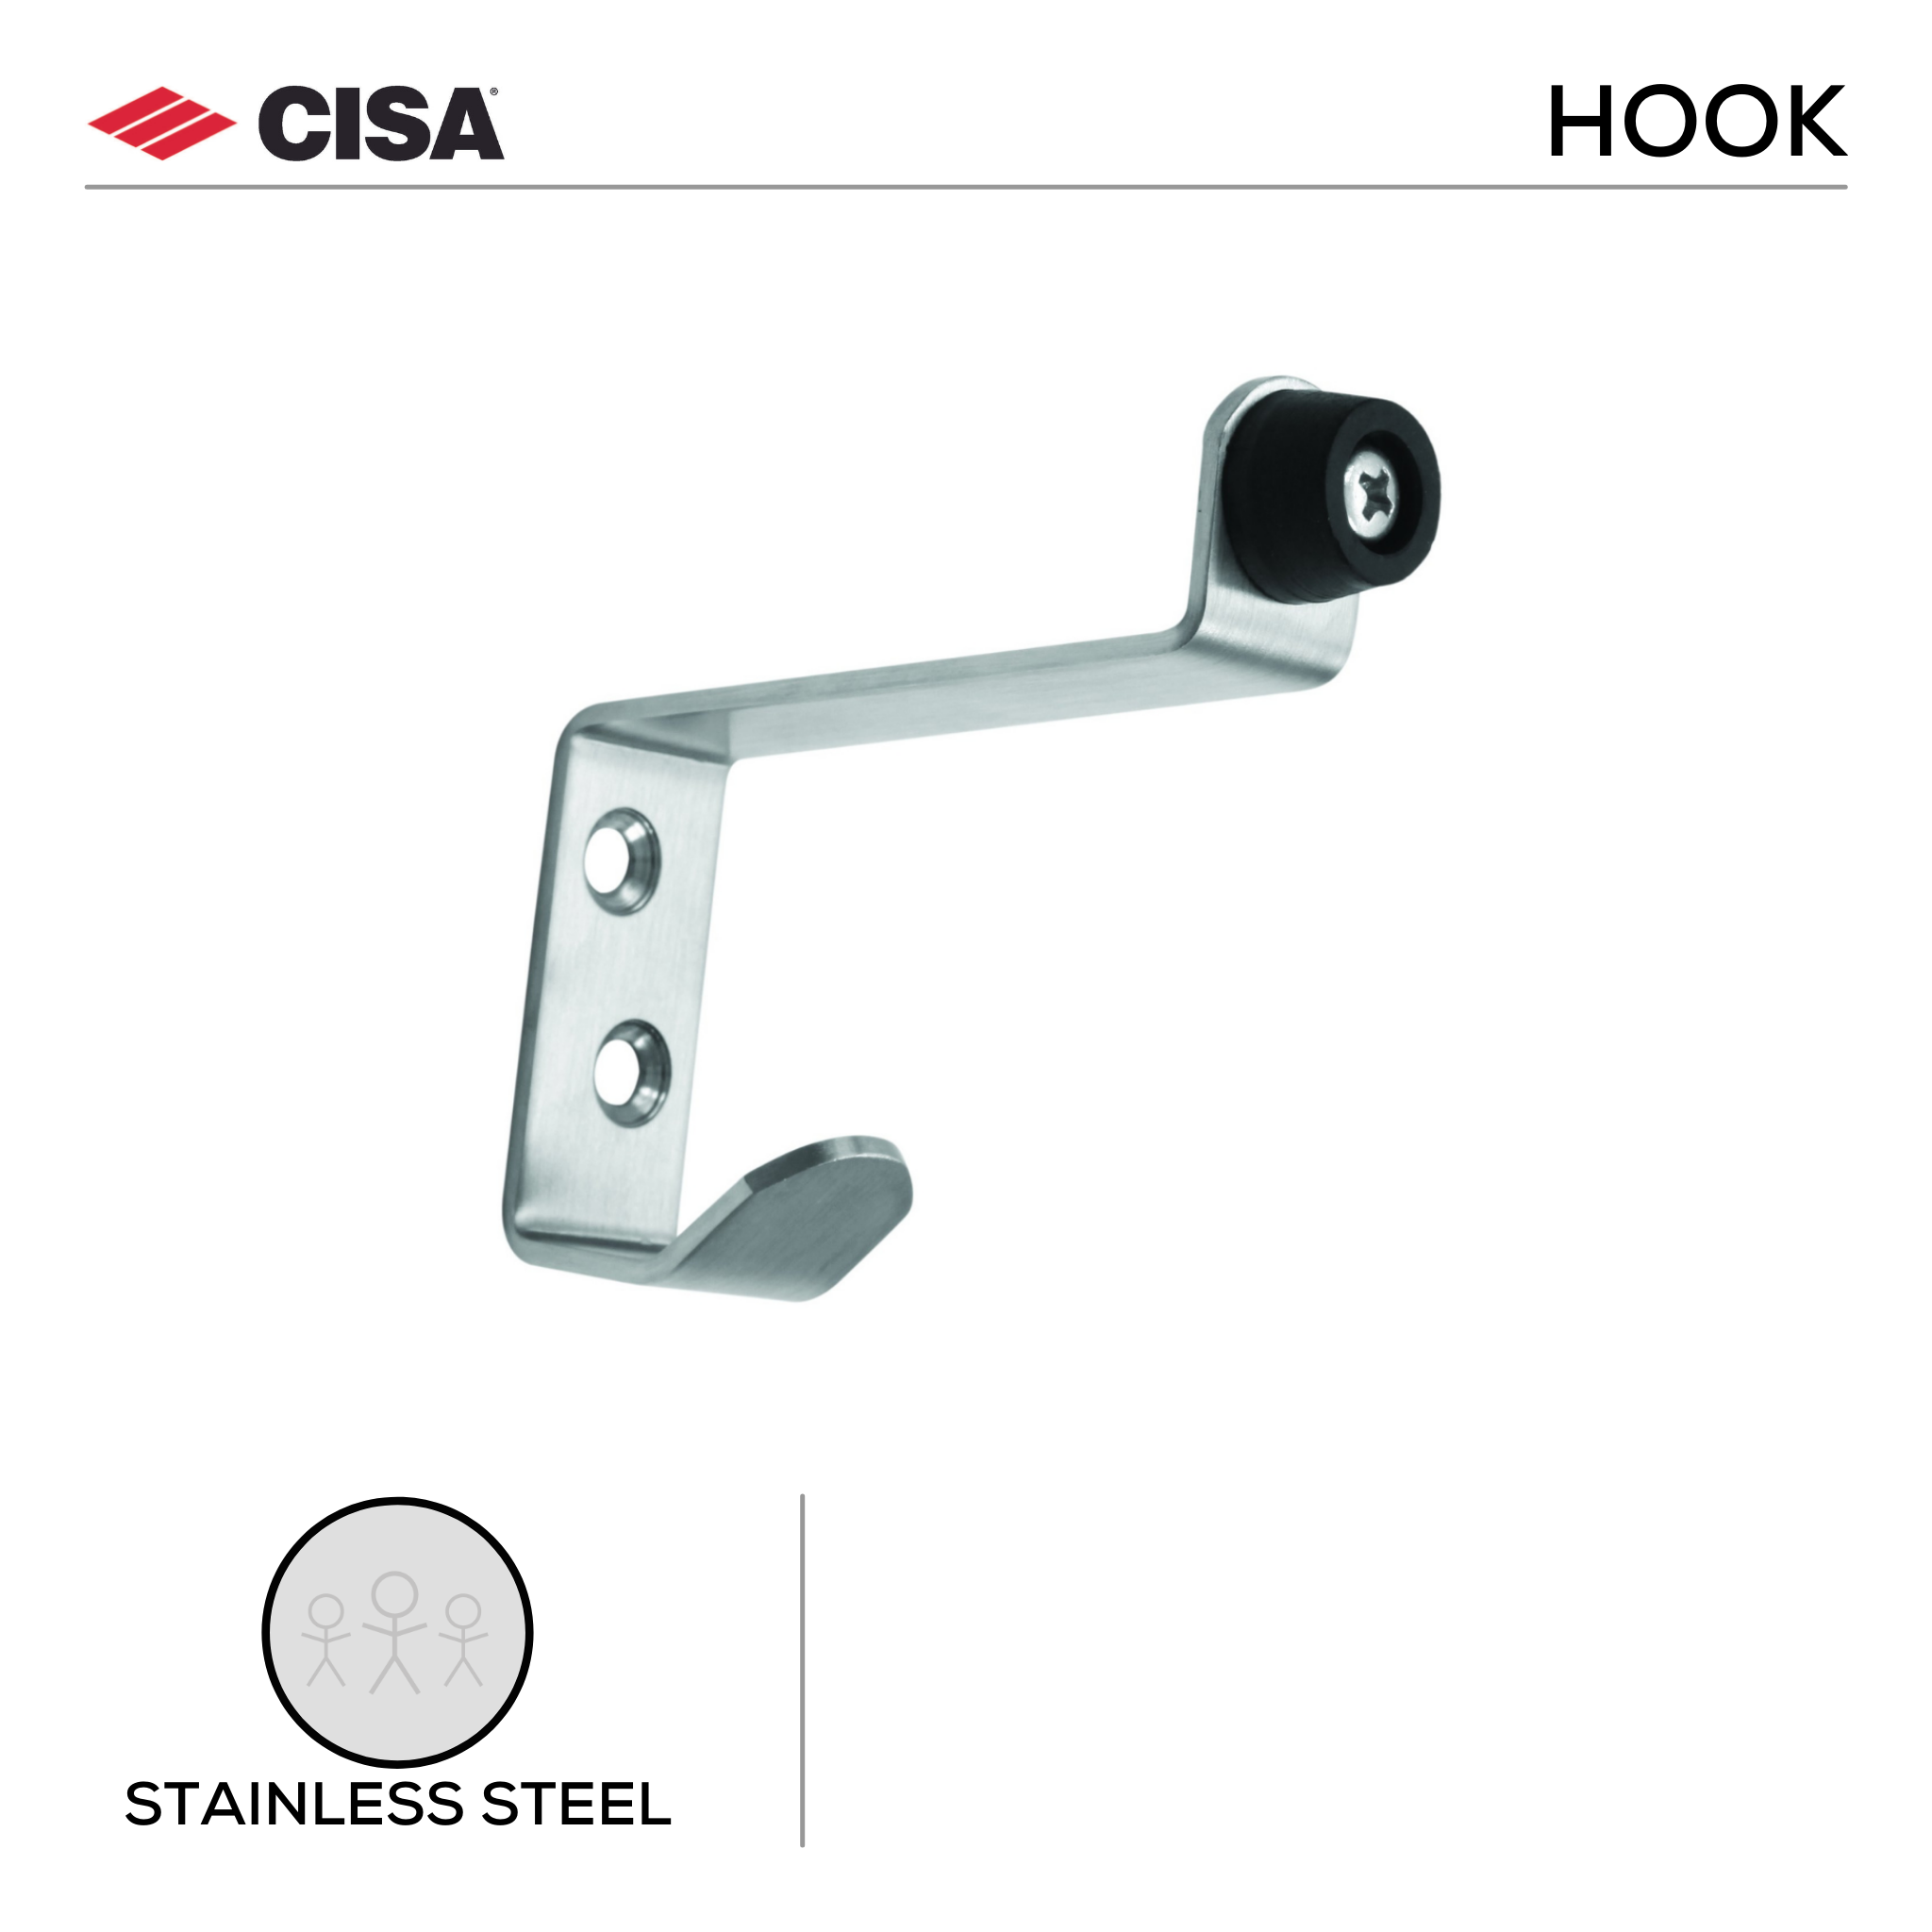 FHACH02.SS, Hat & Coat Hook, Stainless Steel, CISA